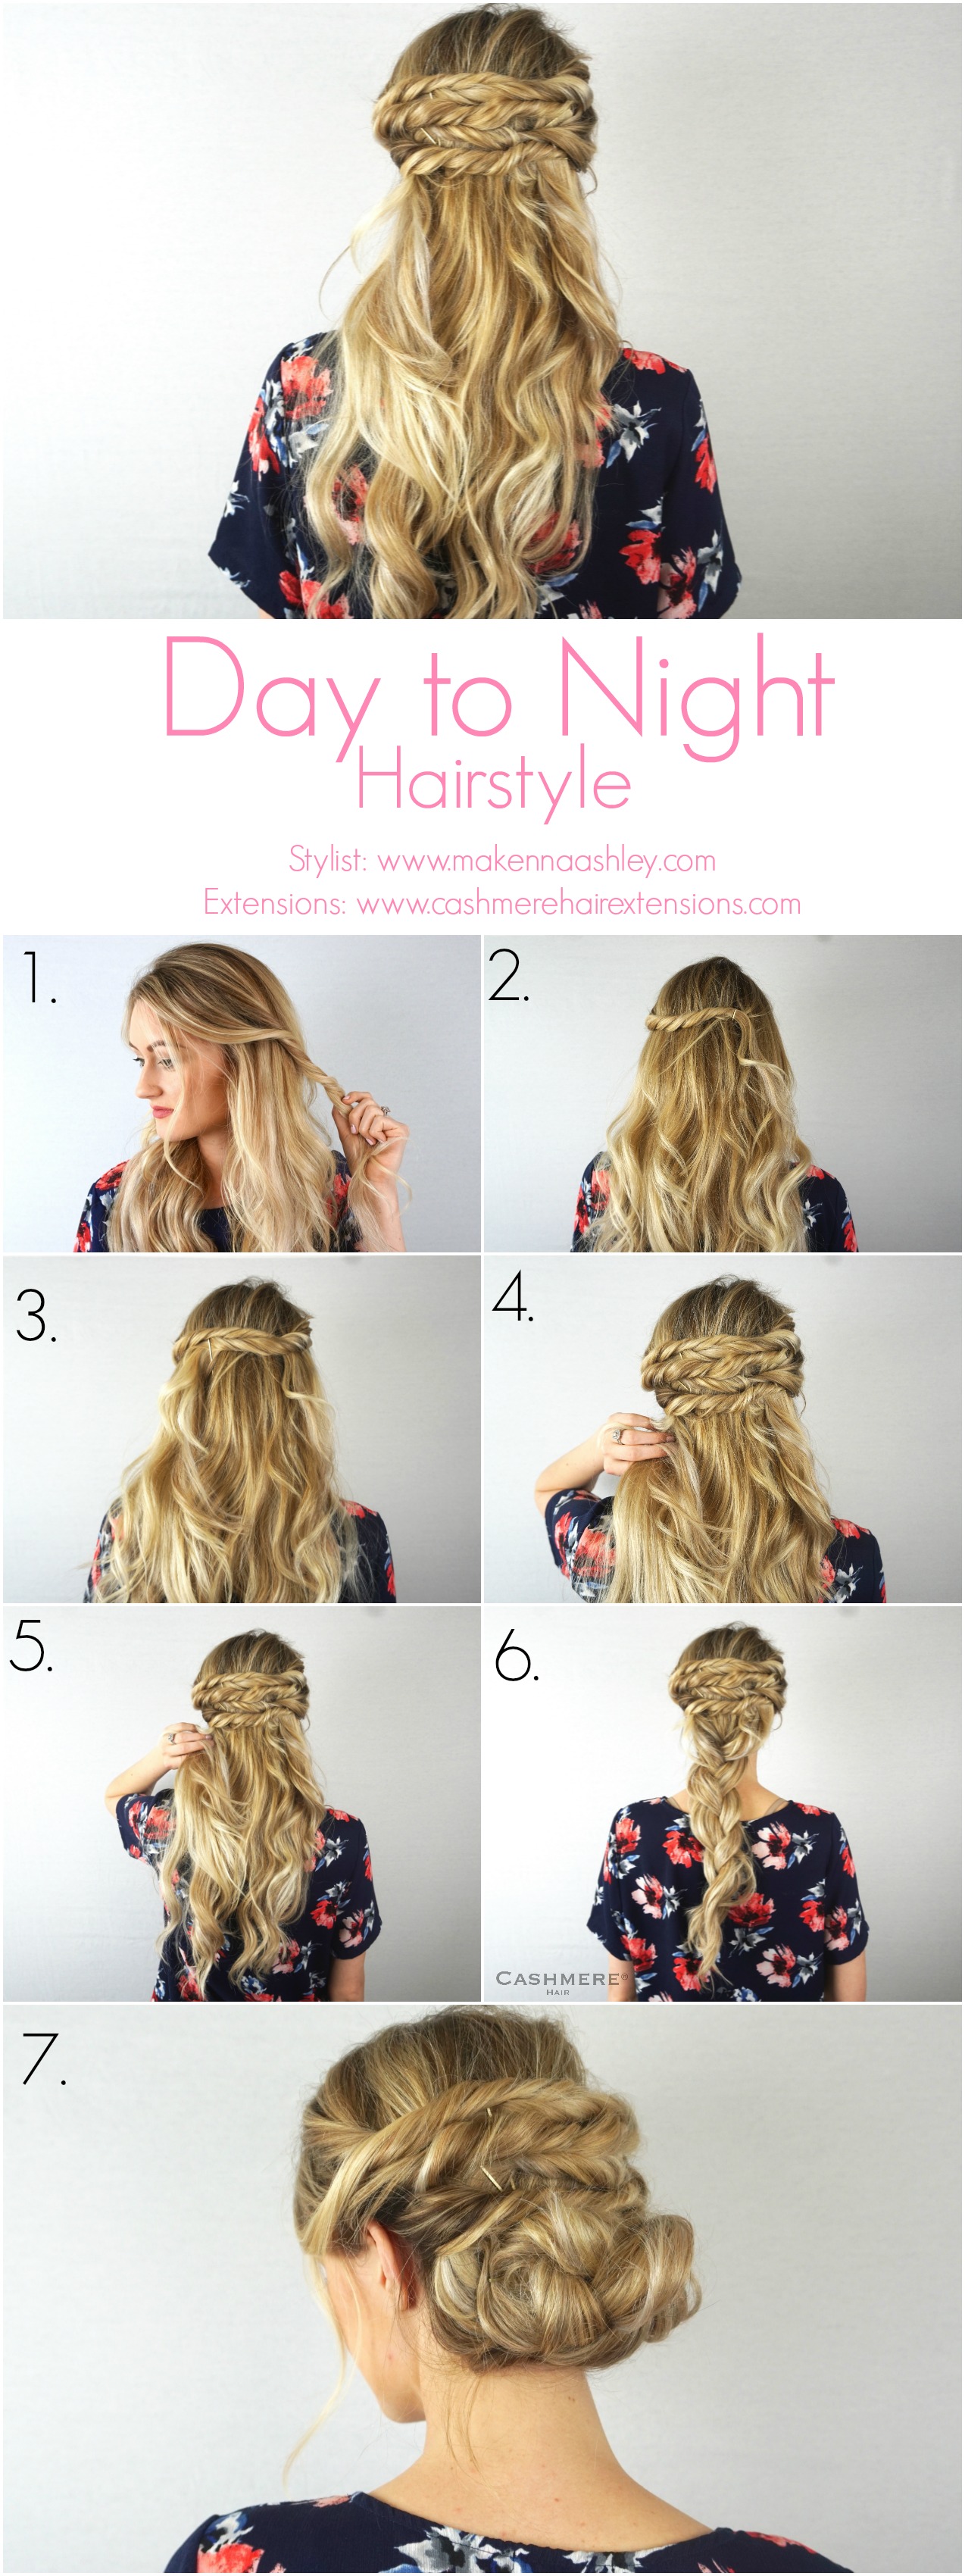 Day to Night Hairstyle - CASHMERE HAIR